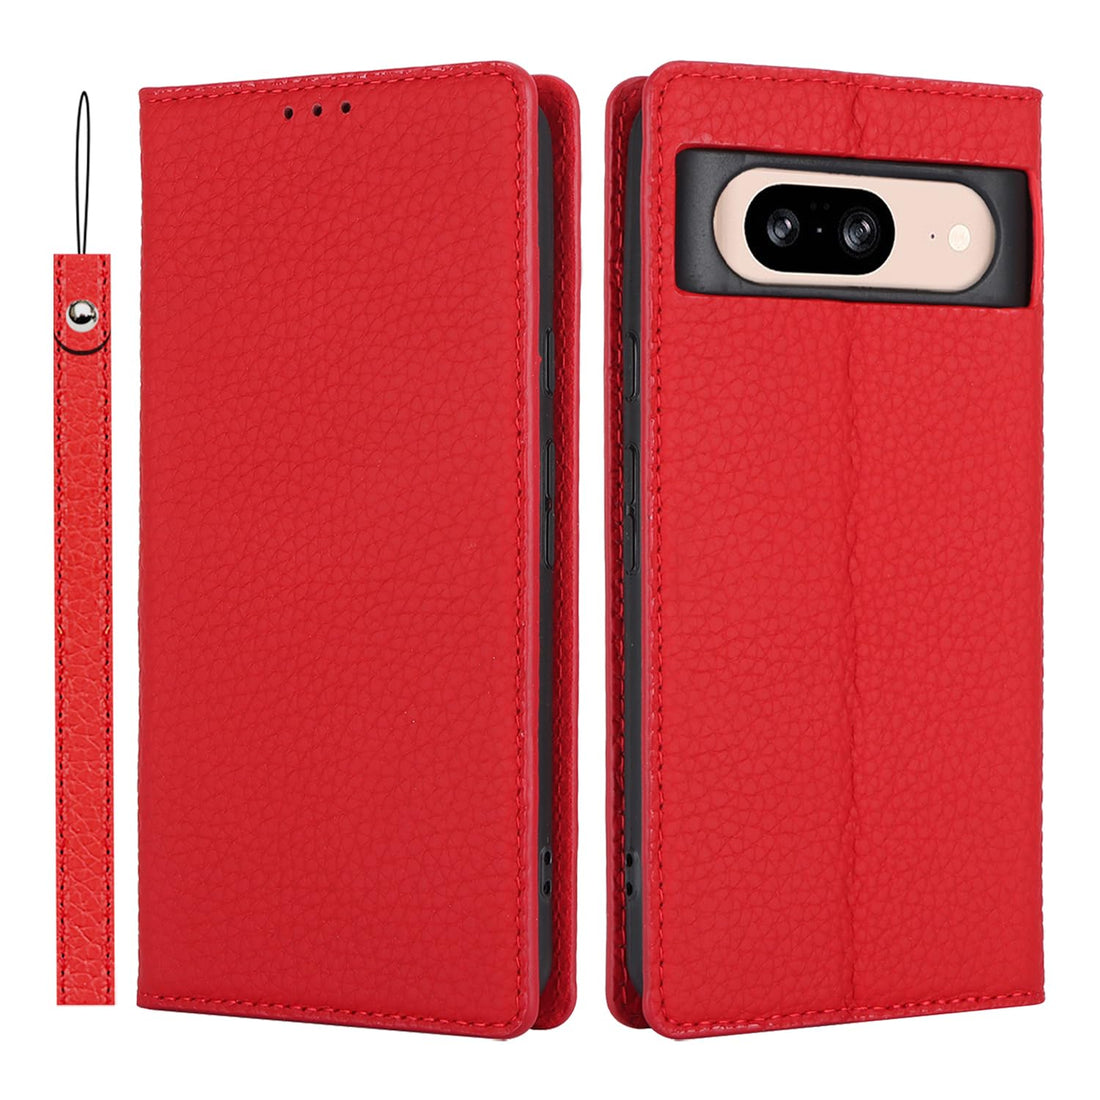 Ｈａｖａｙａ for Pixel 8 Case Genuine Leather Google Pixel 8 Wallet case with Card Holder for Women flip Folio Phone Cover with Credit Card Slots for Men-Red